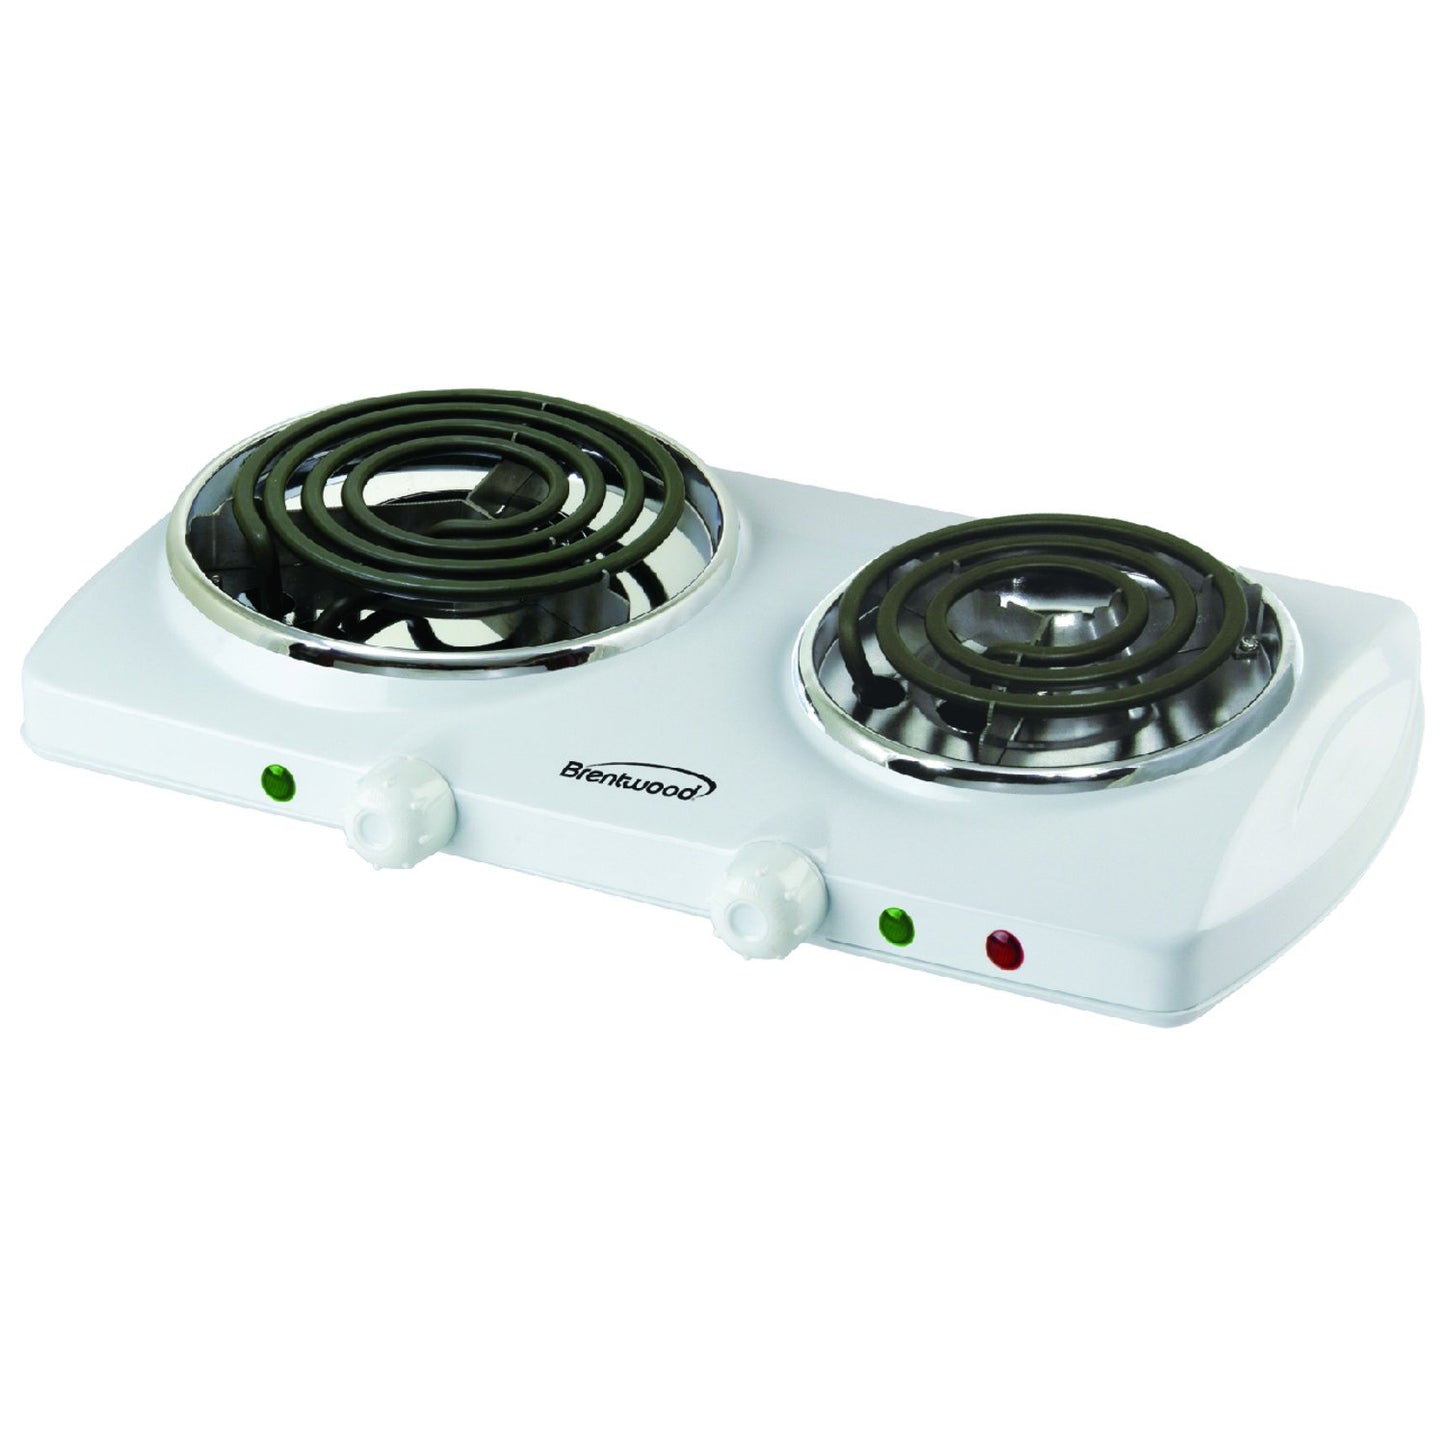 Brentwood Appl. TS-368 1,500W Double Electric Burner